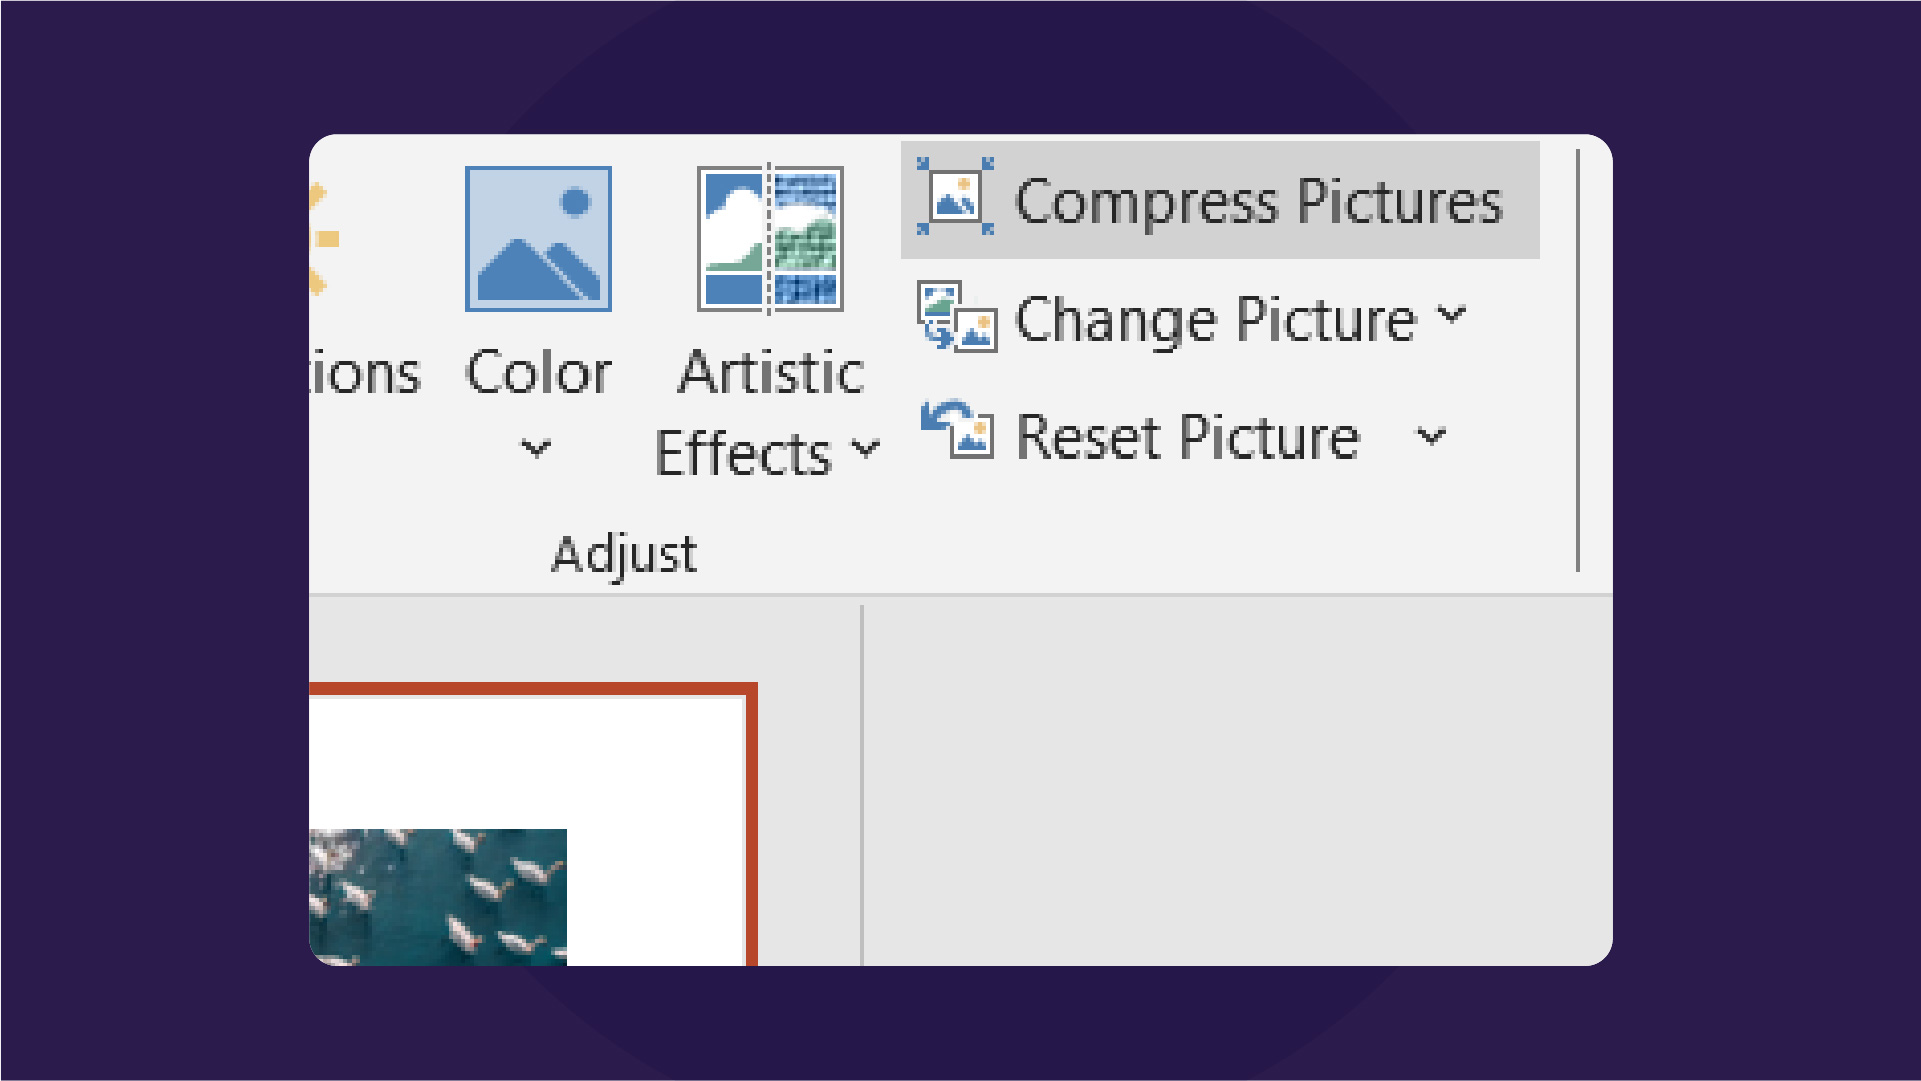 Compressing images in PowerPoint